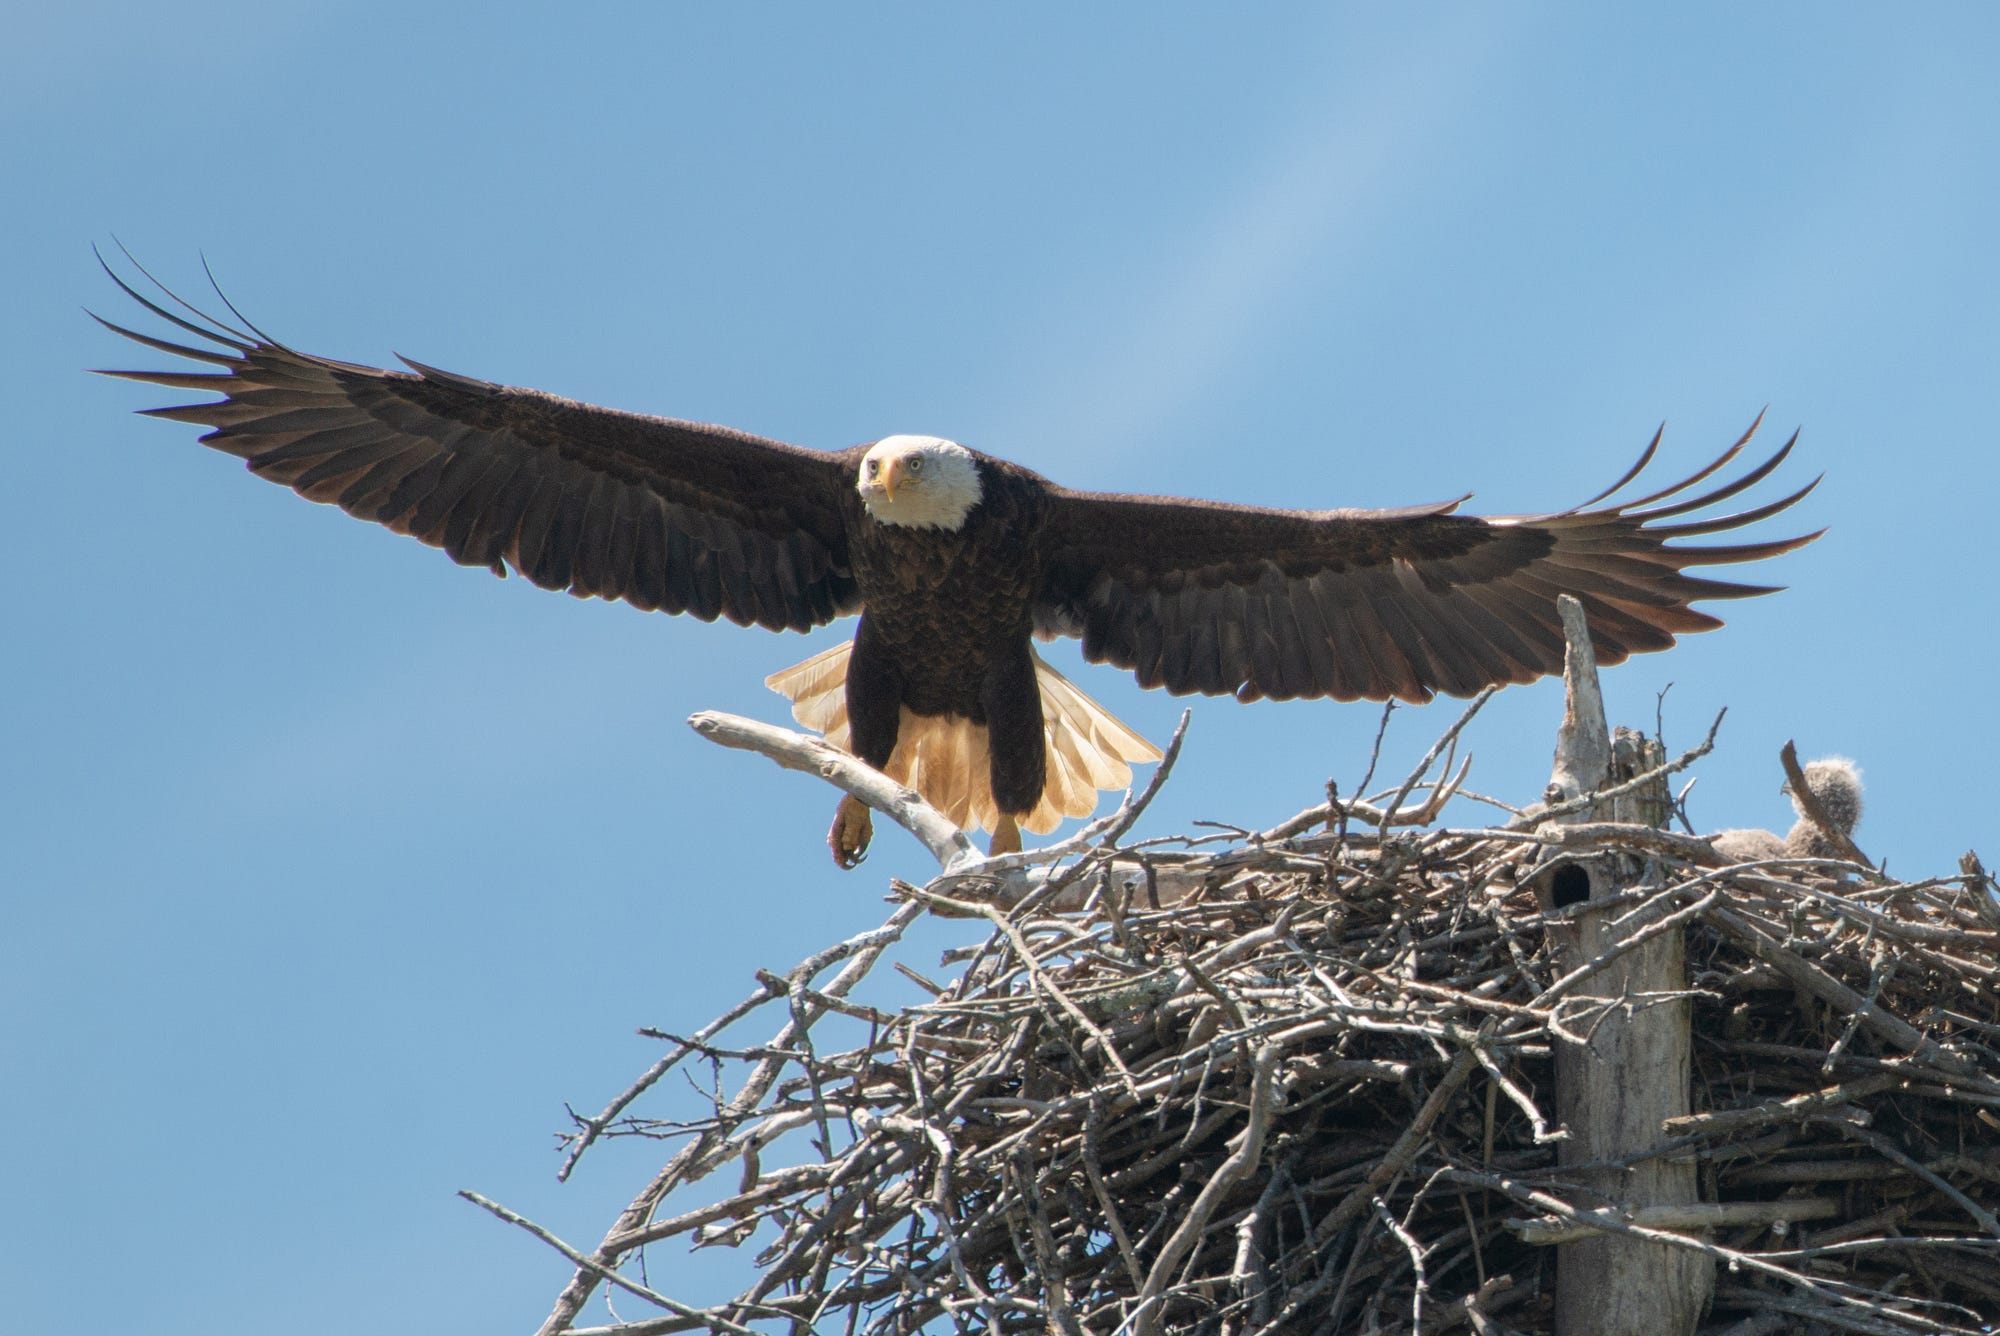 What Eagles Can Teach Us About Parenting, by Dena@Write-Solutions